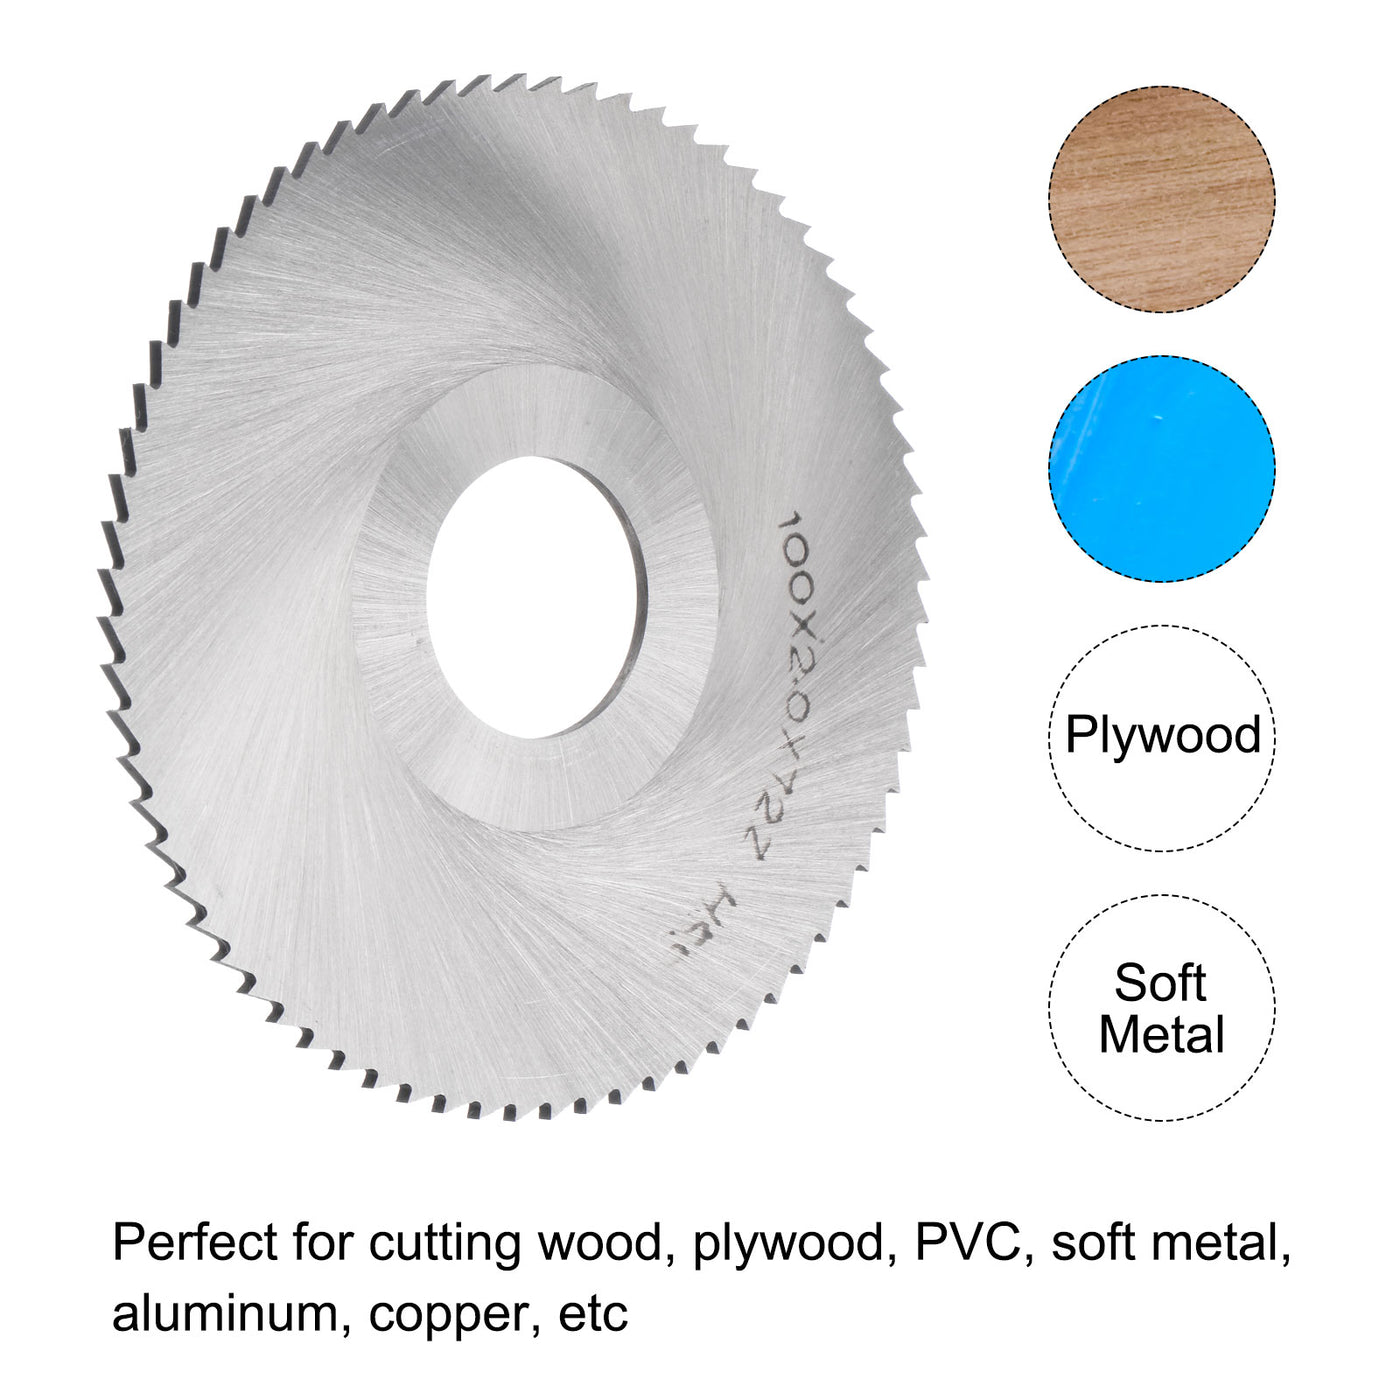 Uxcell Uxcell 125mm Dia 27mm Arbor 1mm Thick 72 Tooth High Speed Steel Circular Saw Blade